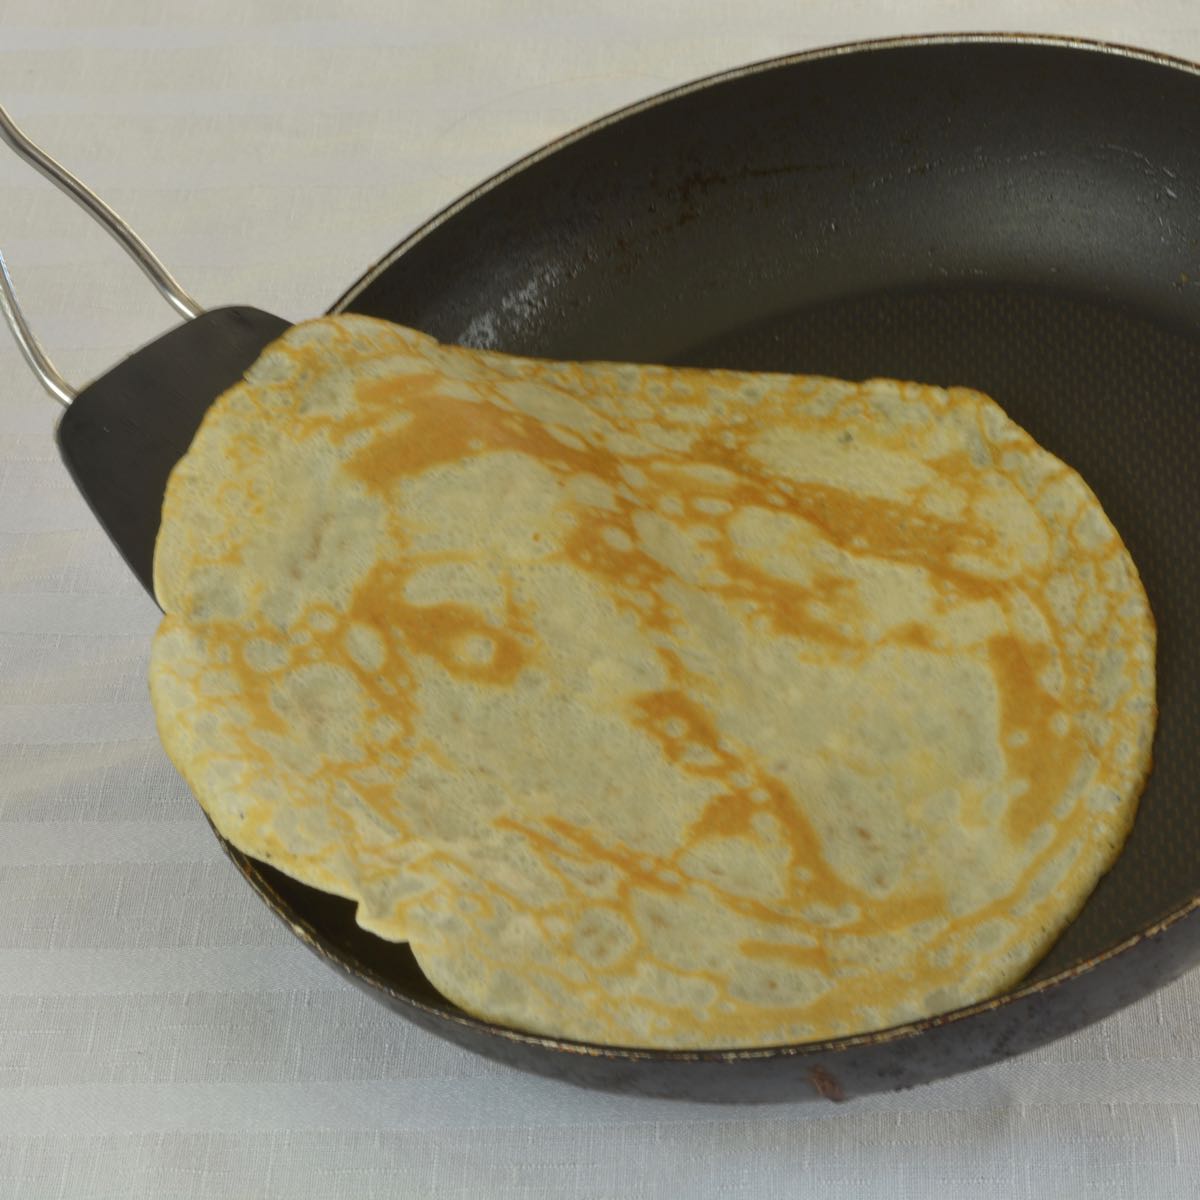 A frying pan with a flipper and a crepe that has just been turned.